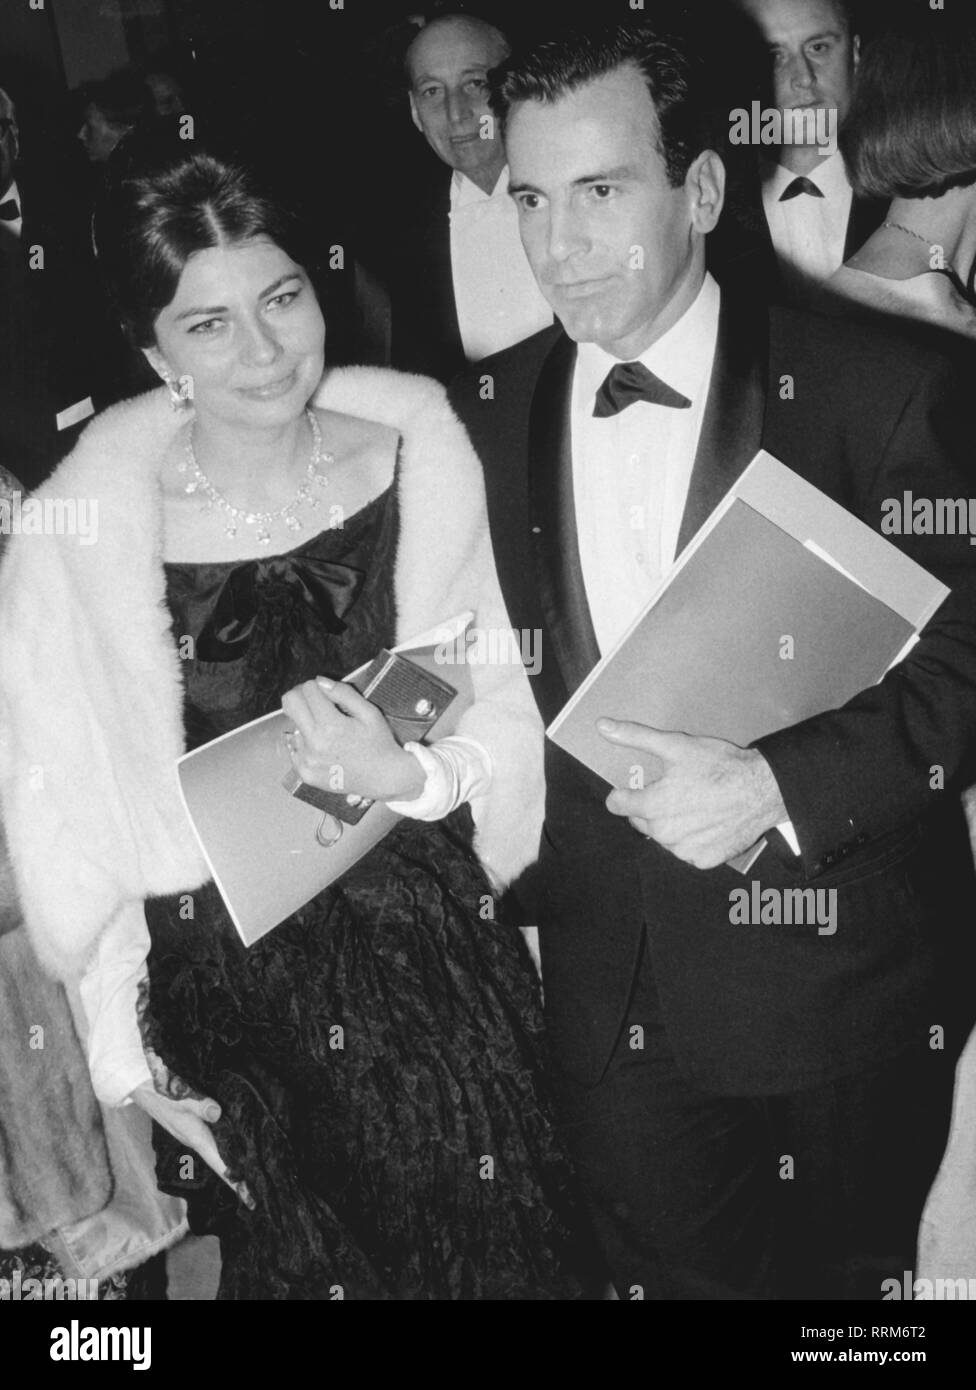 Soraya, 22.6.1932 - 25.10.2001, Empress of Persia 12.2.1951 - 6.4.1958, half length, with actor Maximilian Schell, re-opening of the National Theatre, Munich, 23.11.1963, Additional-Rights-Clearance-Info-Not-Available Stock Photo